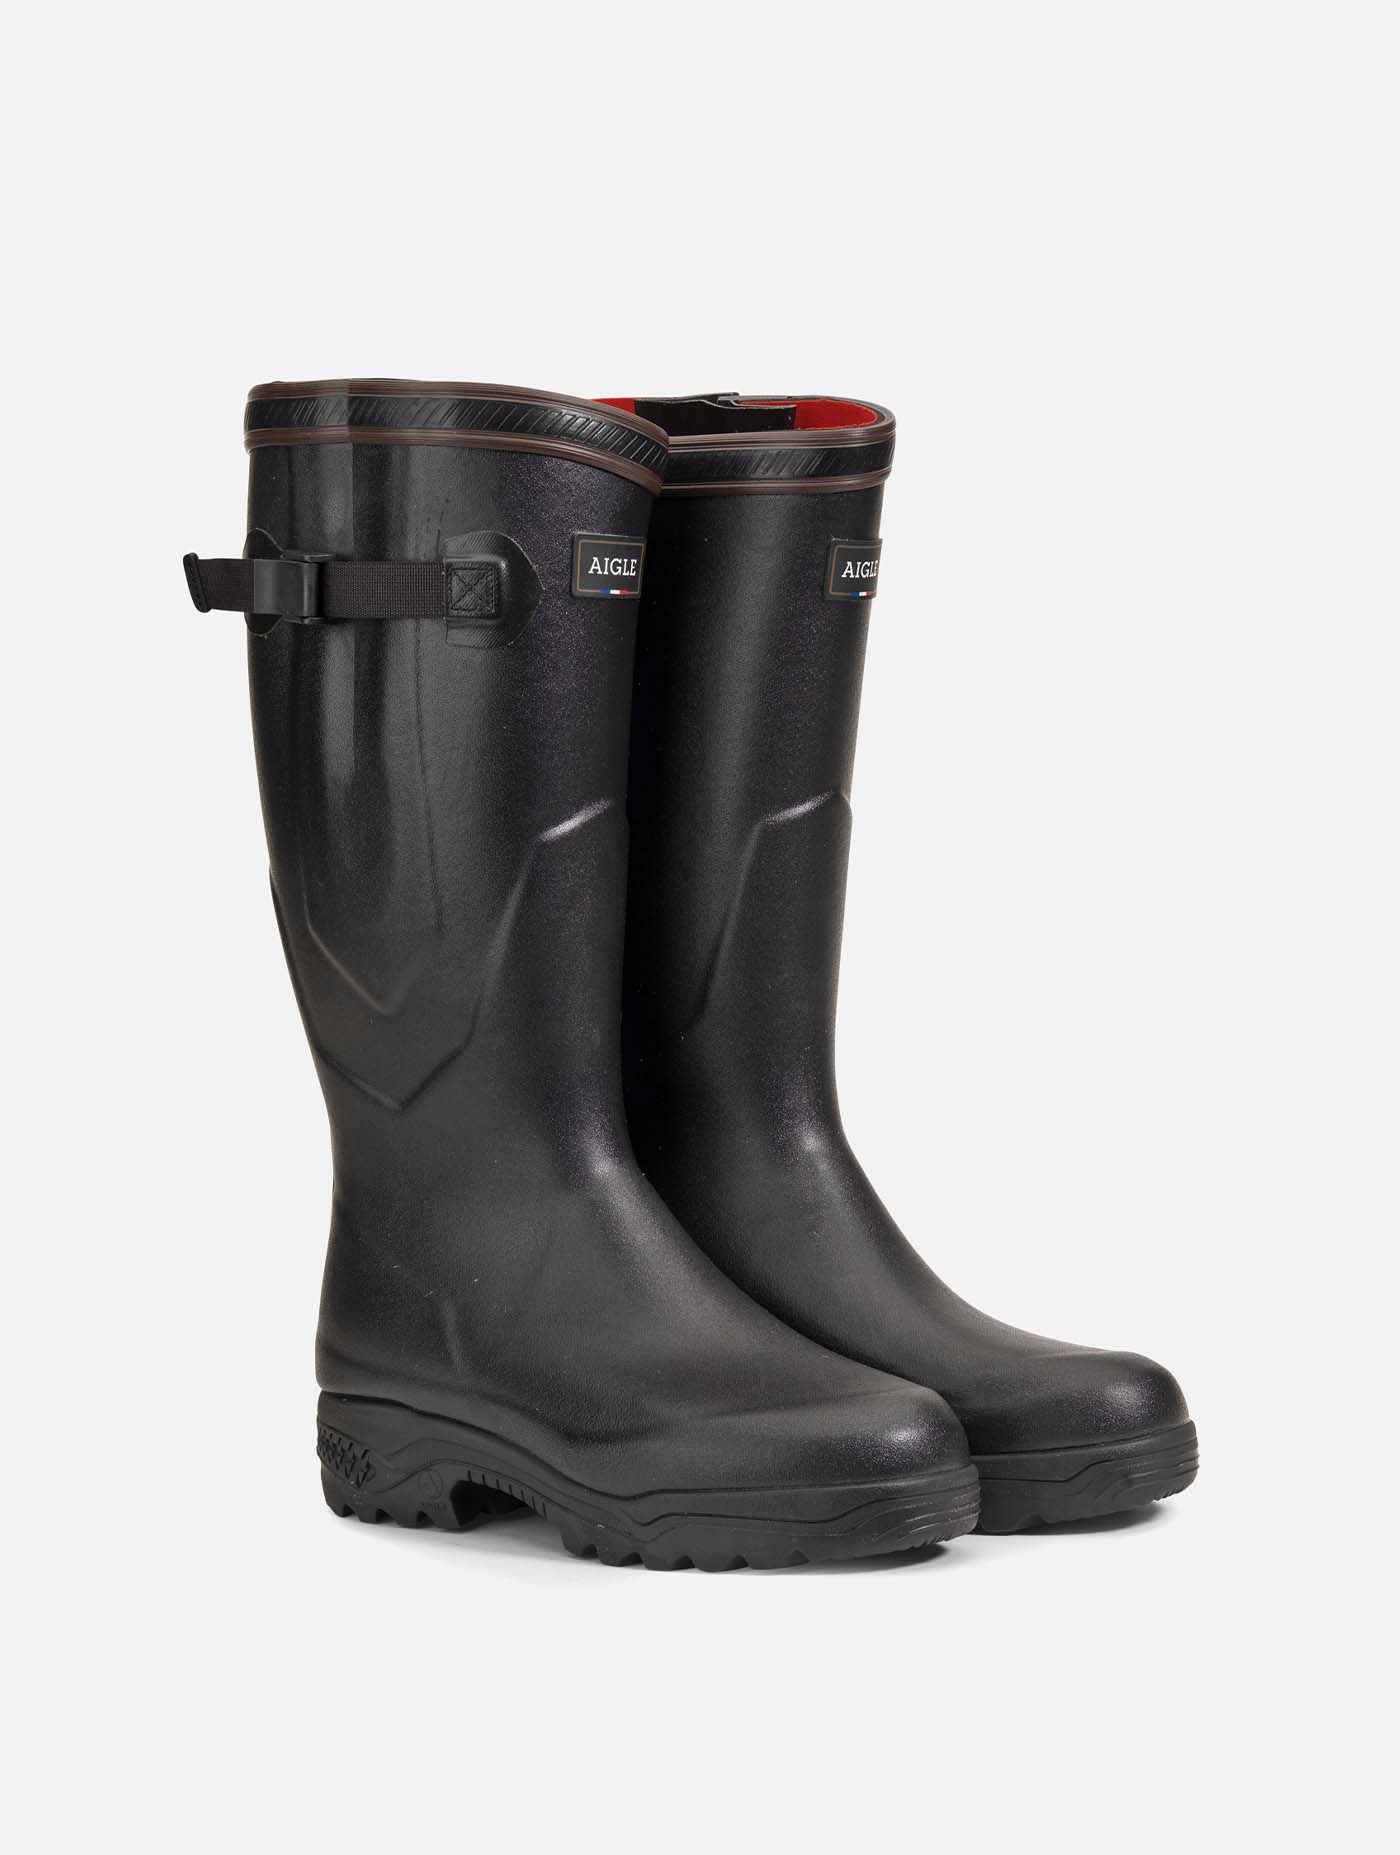 Aigle - Anti-fatigue boots for cold weather, in France Noir - Parcours® 2 iso | AIGLE